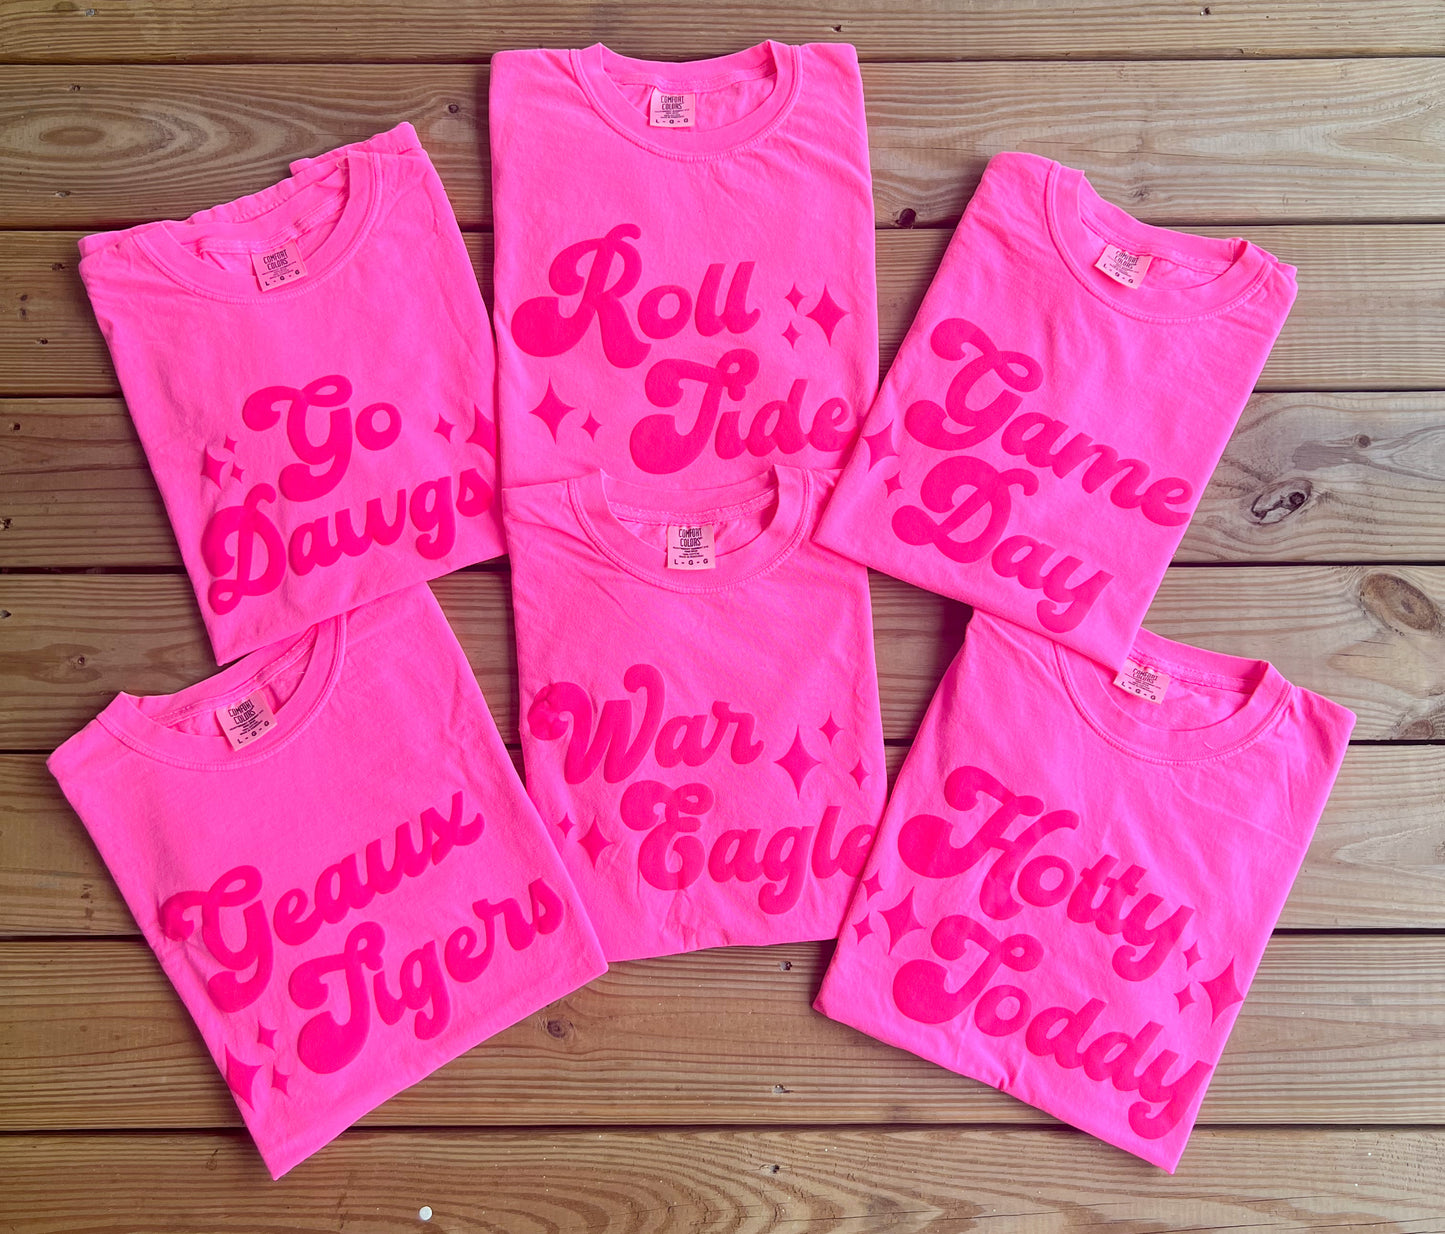 3D Puff Neon Preppy Game Day T-Shirts